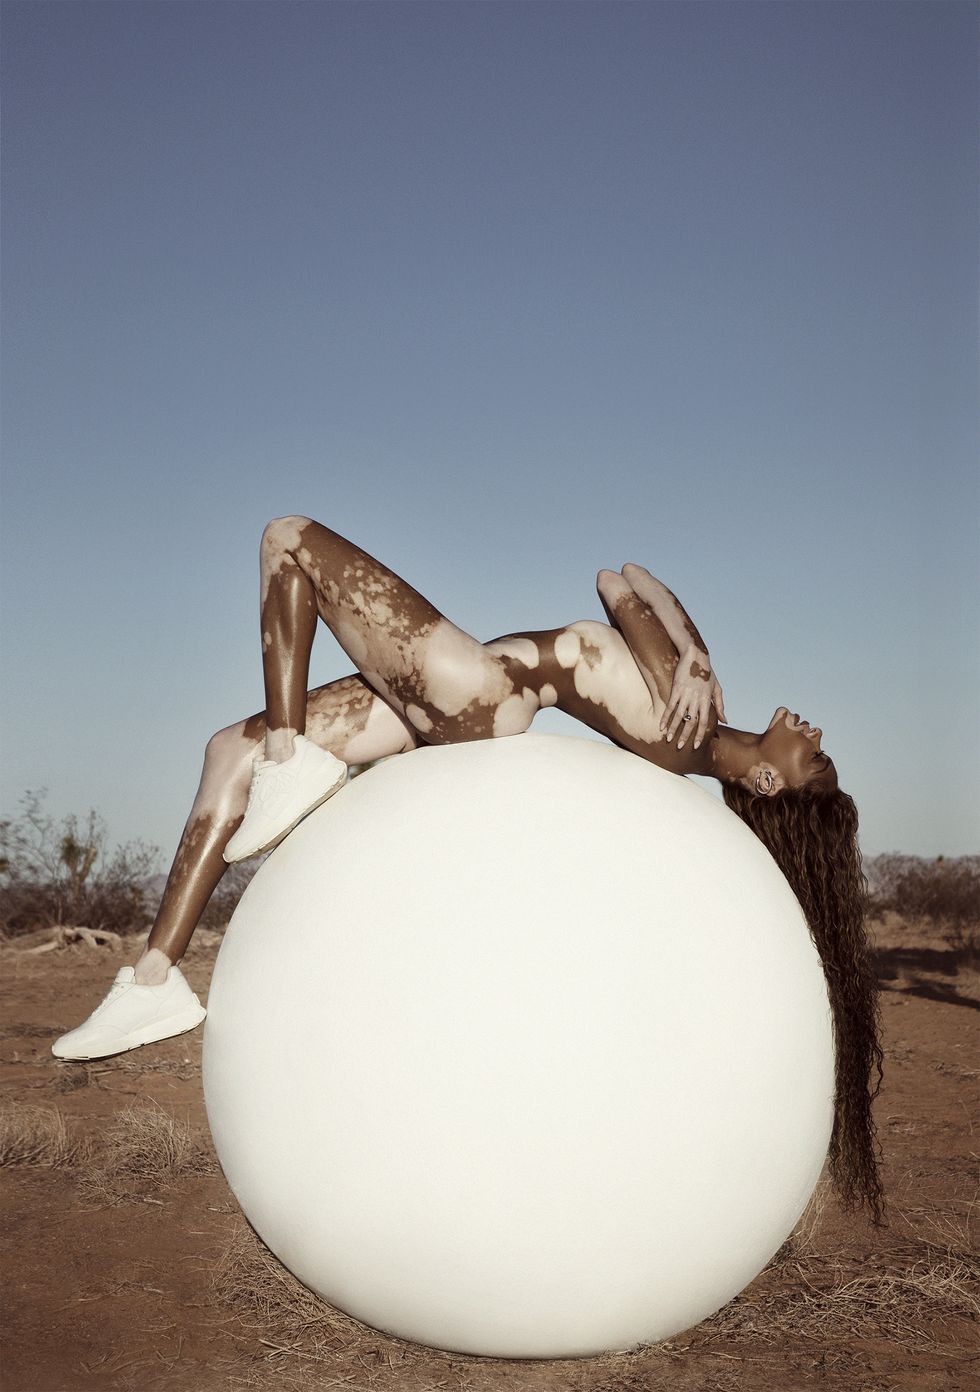 model winnie harlow lying bare on her back on big concrete white ball, head looking up at sky, arms crossed covering her upper body, on an open desert like landscape with blue sky